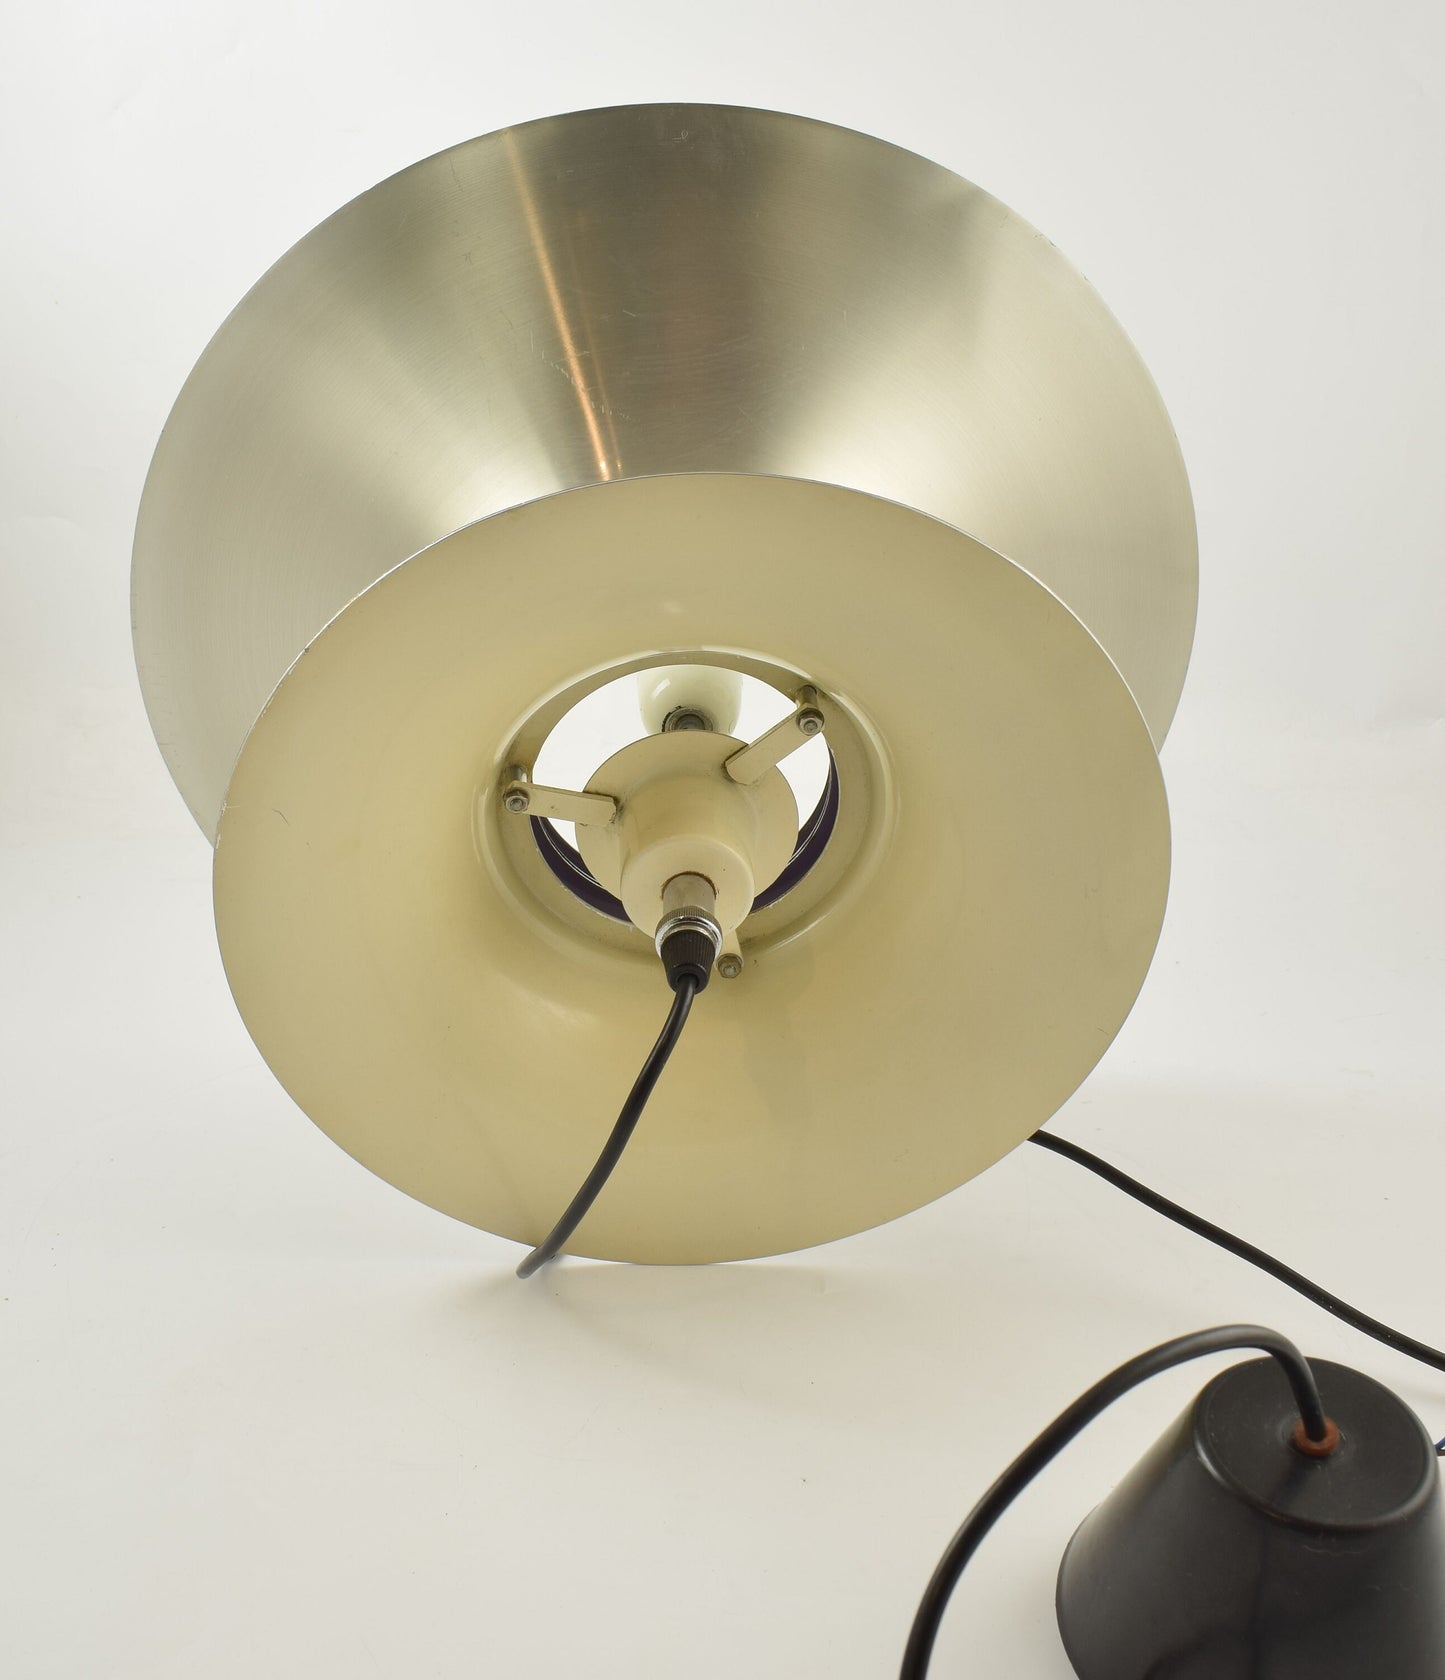 Lyskaer Bent Nordsted aluminium design pendant lamp from Bent Nordsted